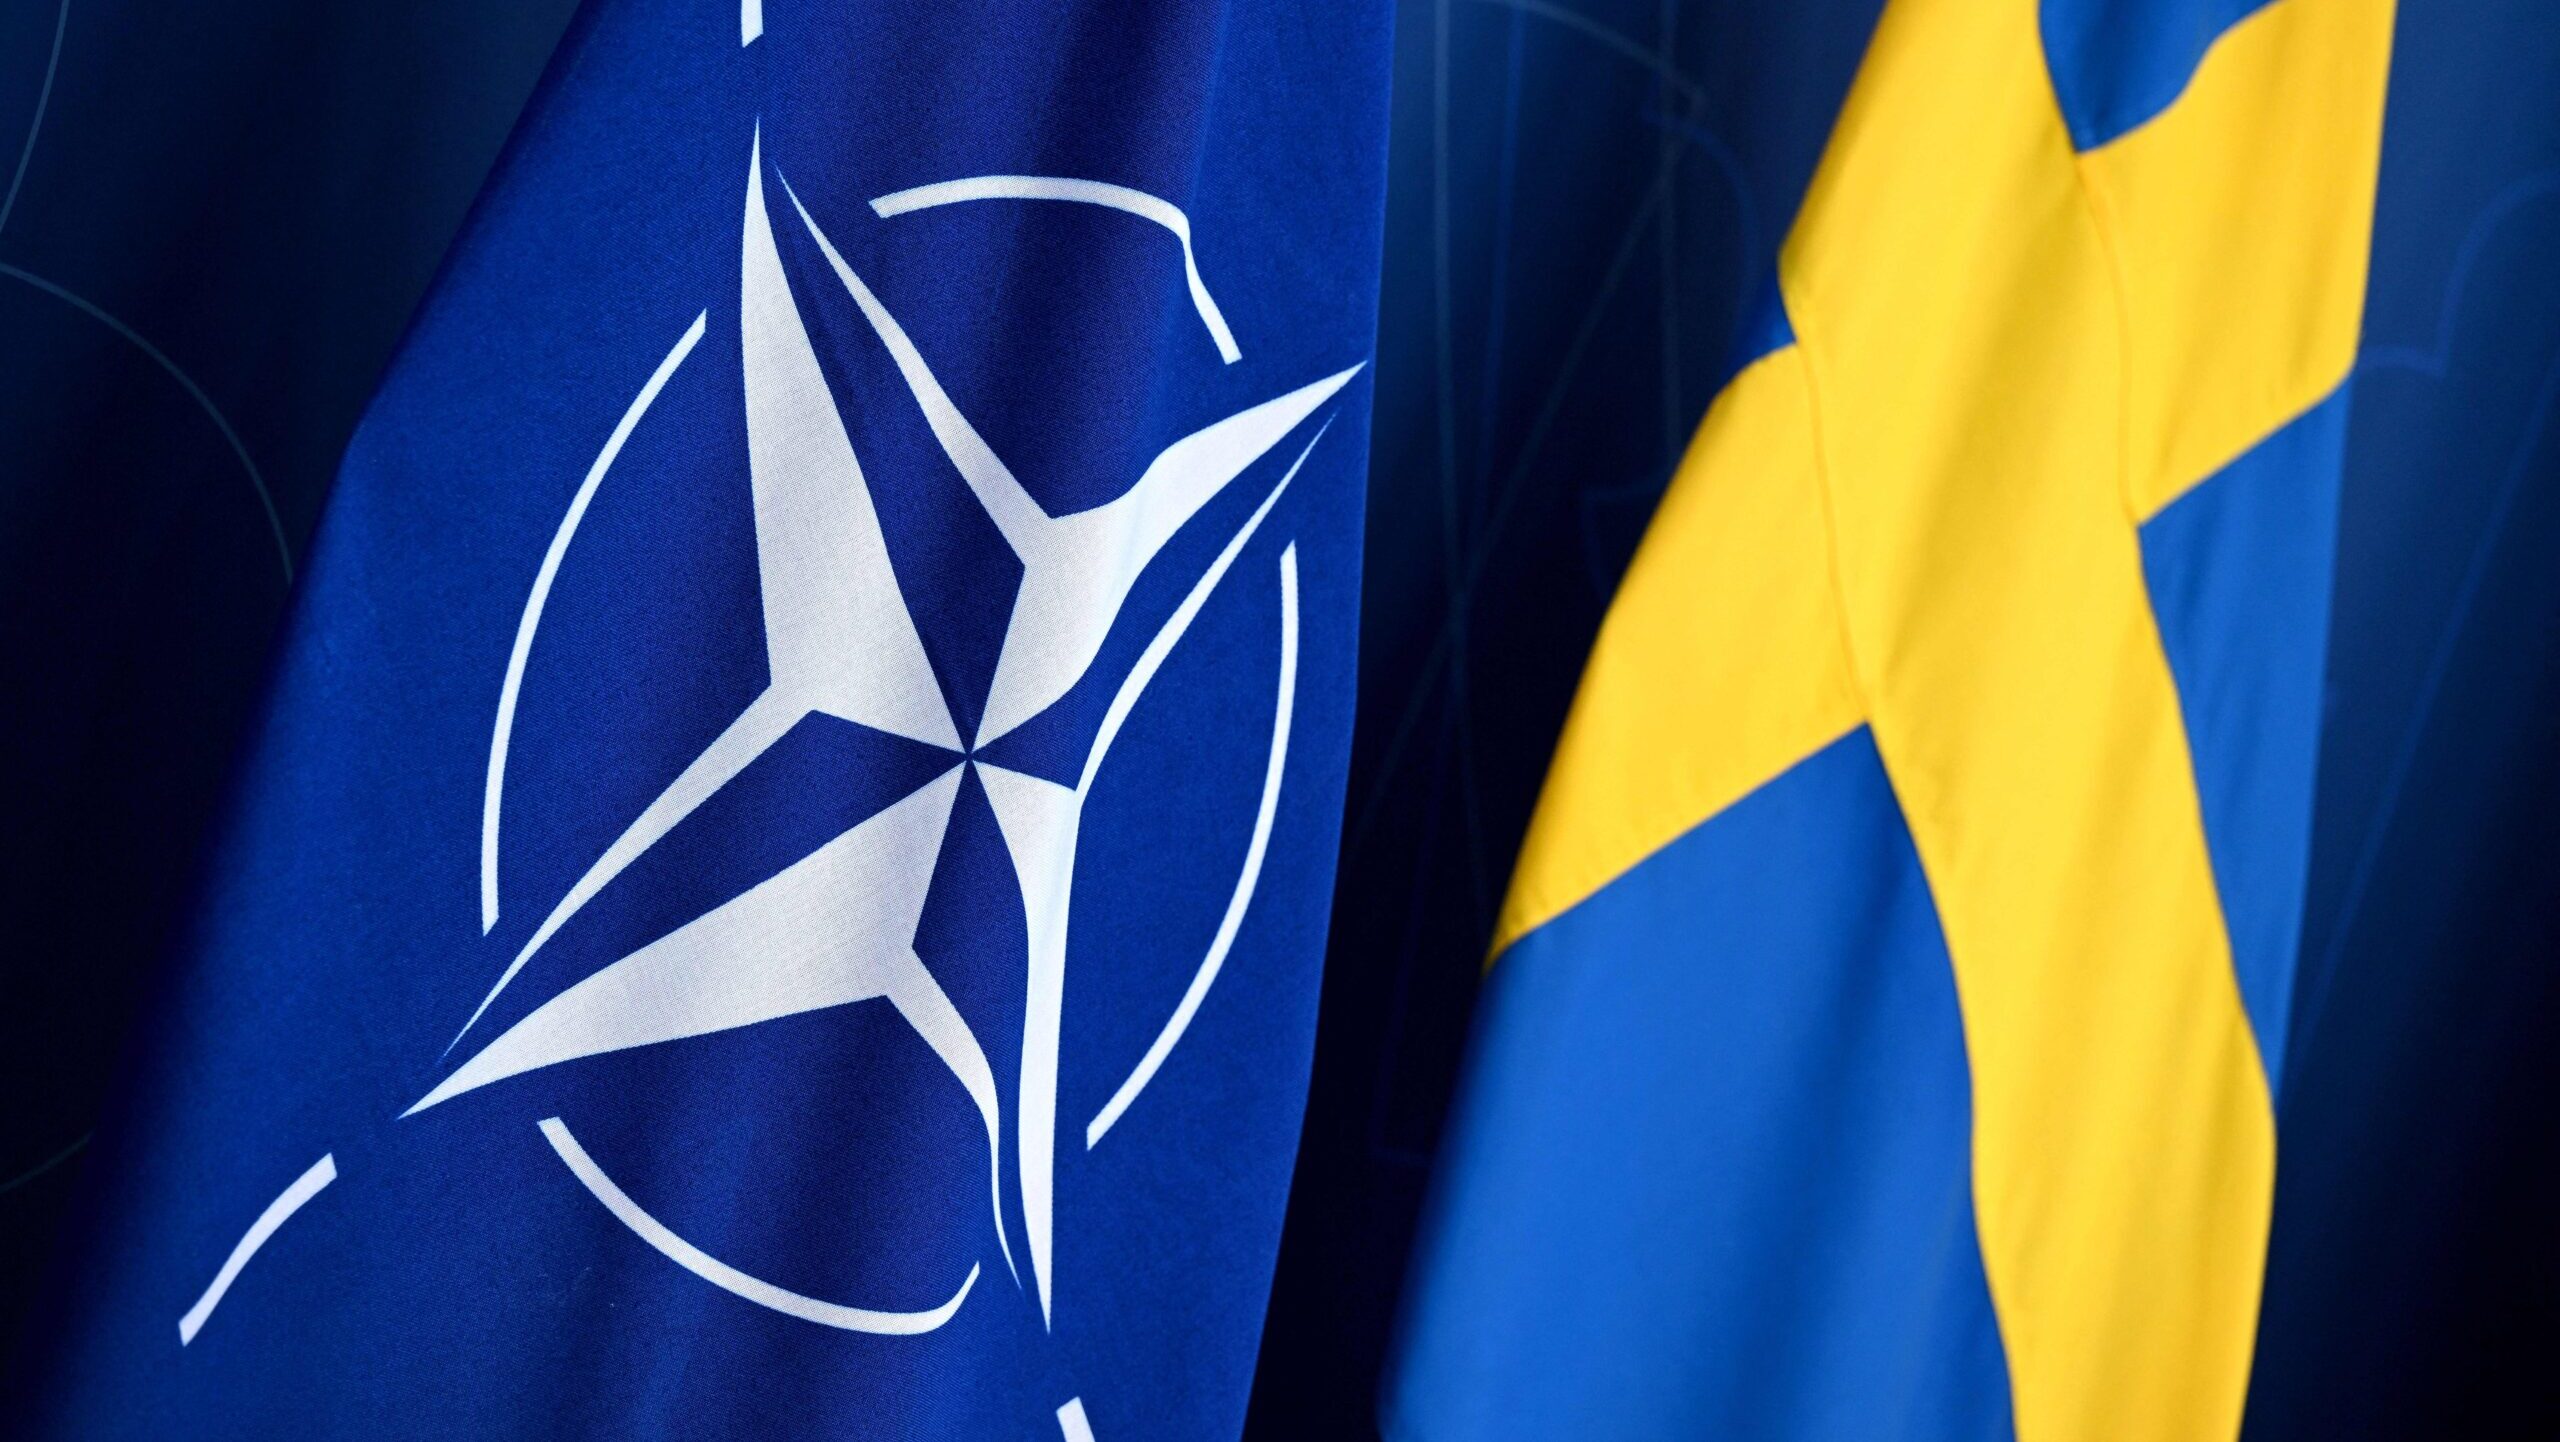 Sweden officially joins NATO as 32nd alliance member